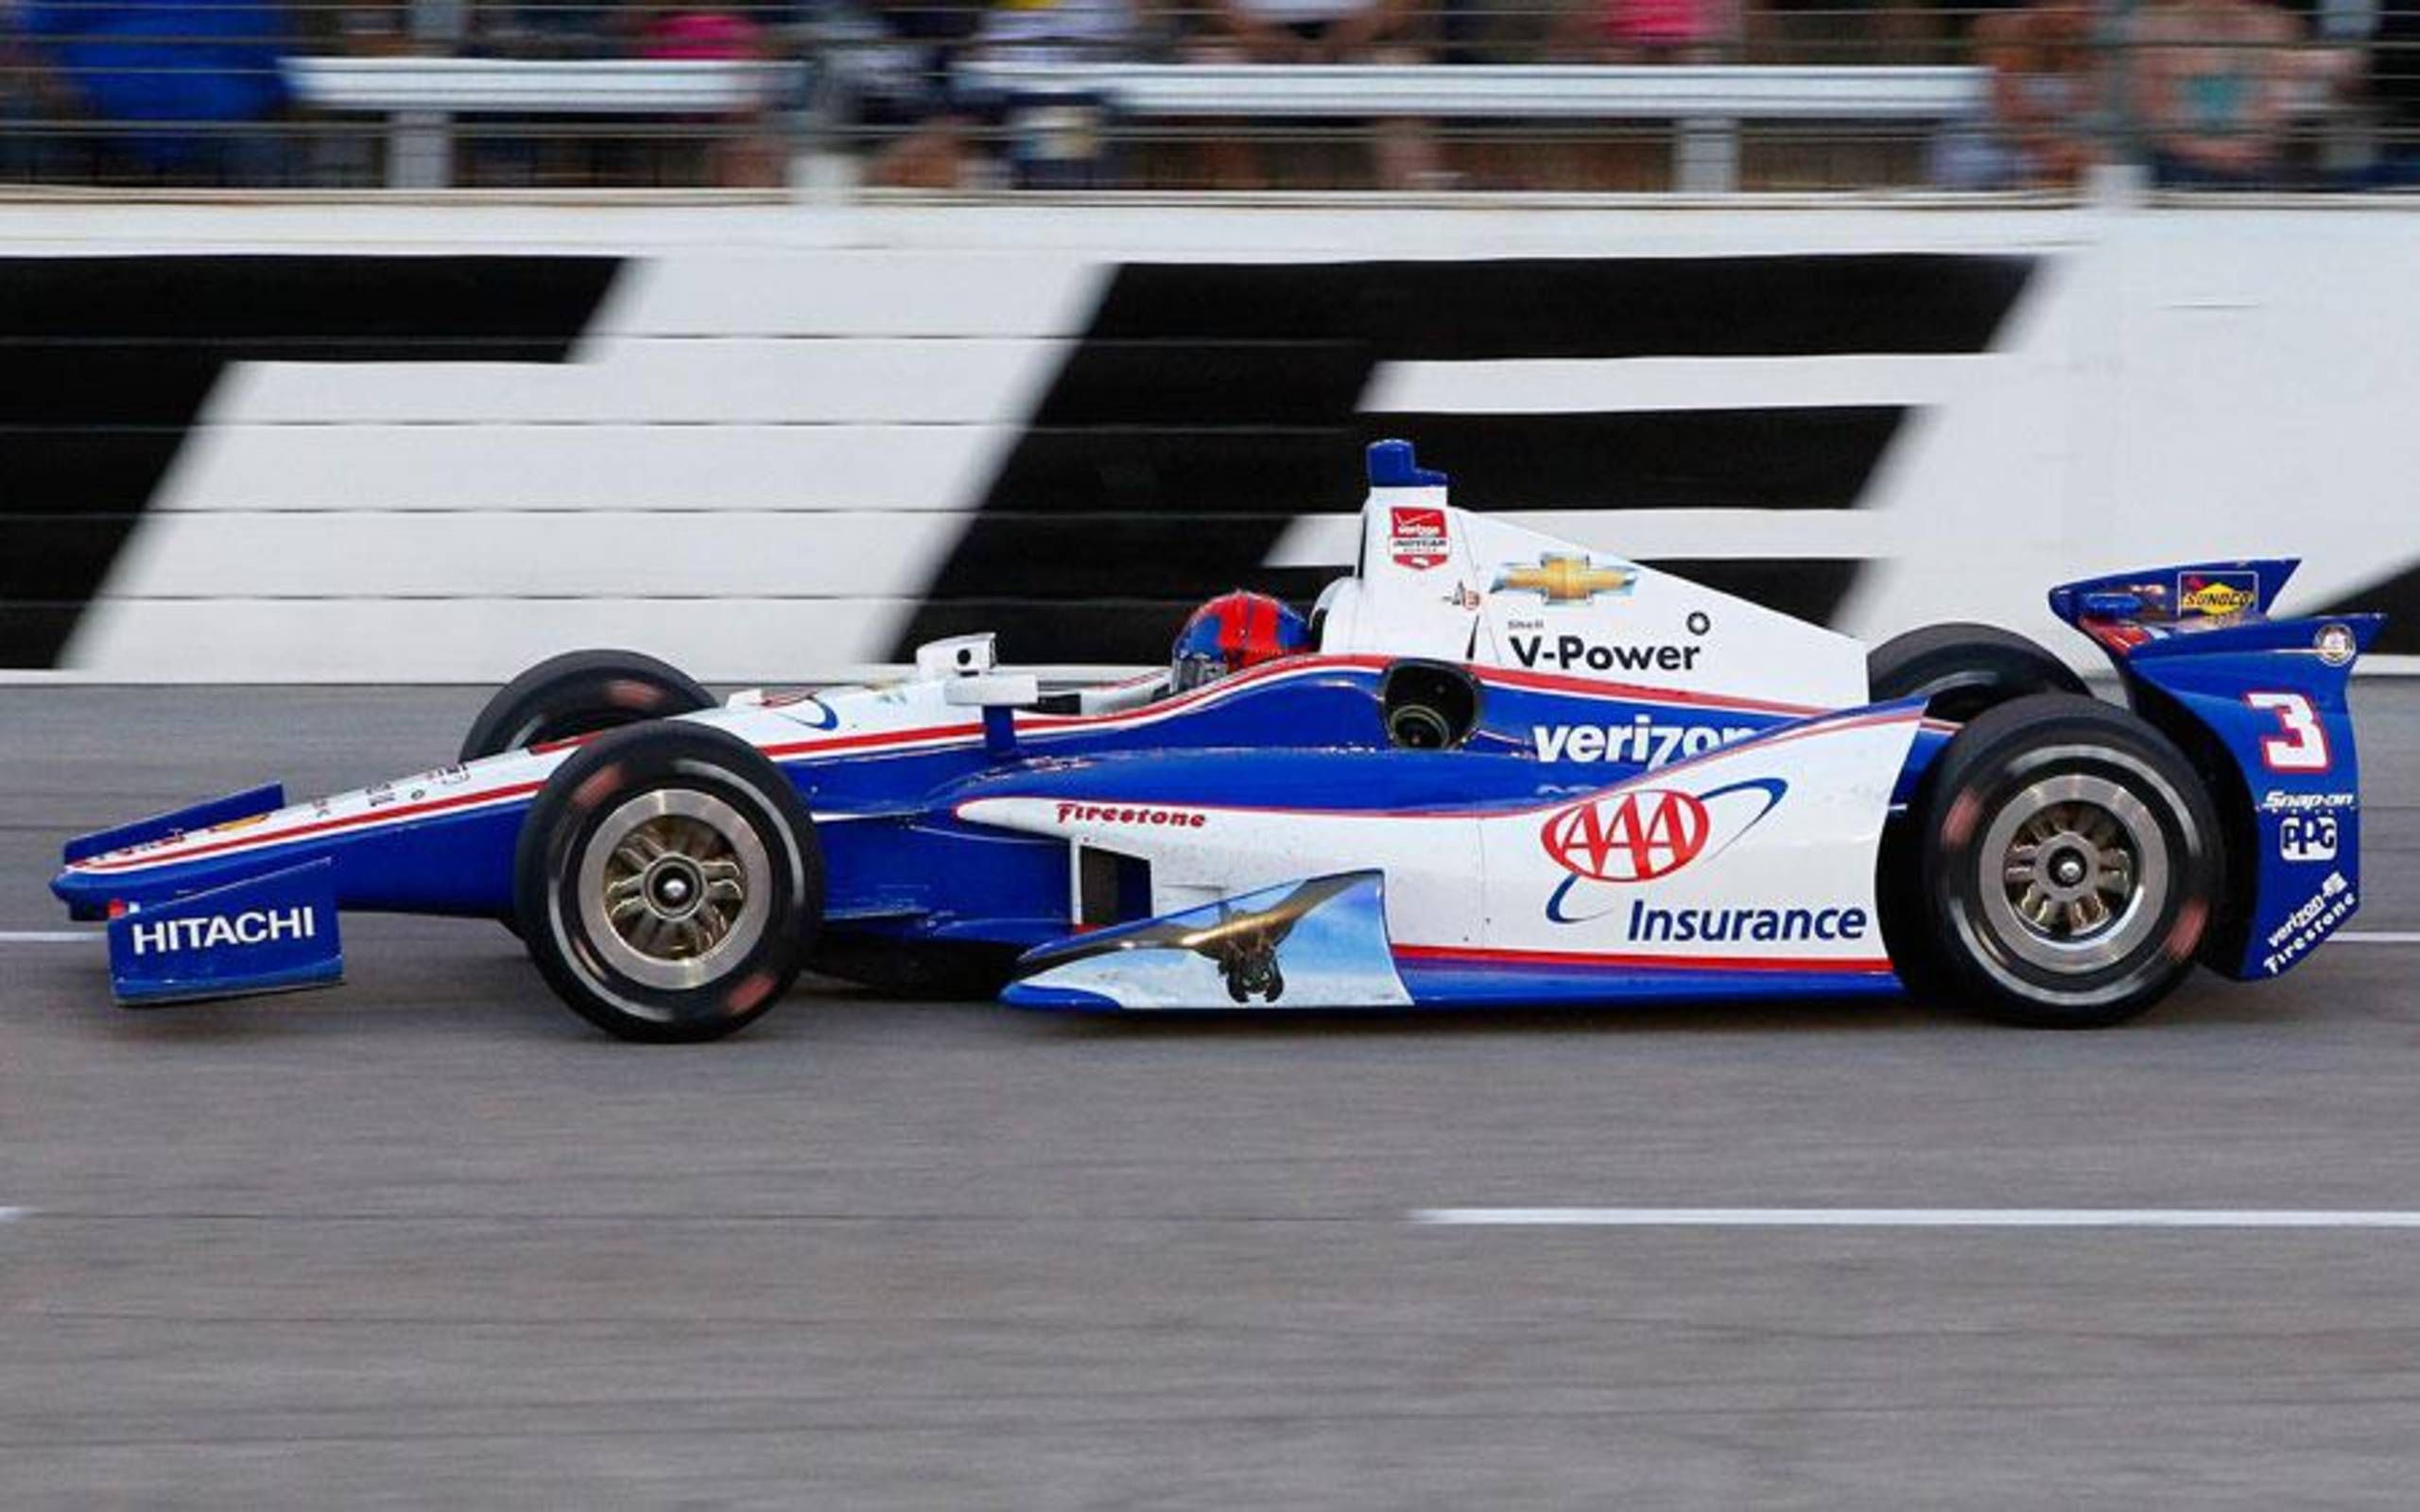 Helio Castroneves returning to scene of 2013 IndyCar collapse